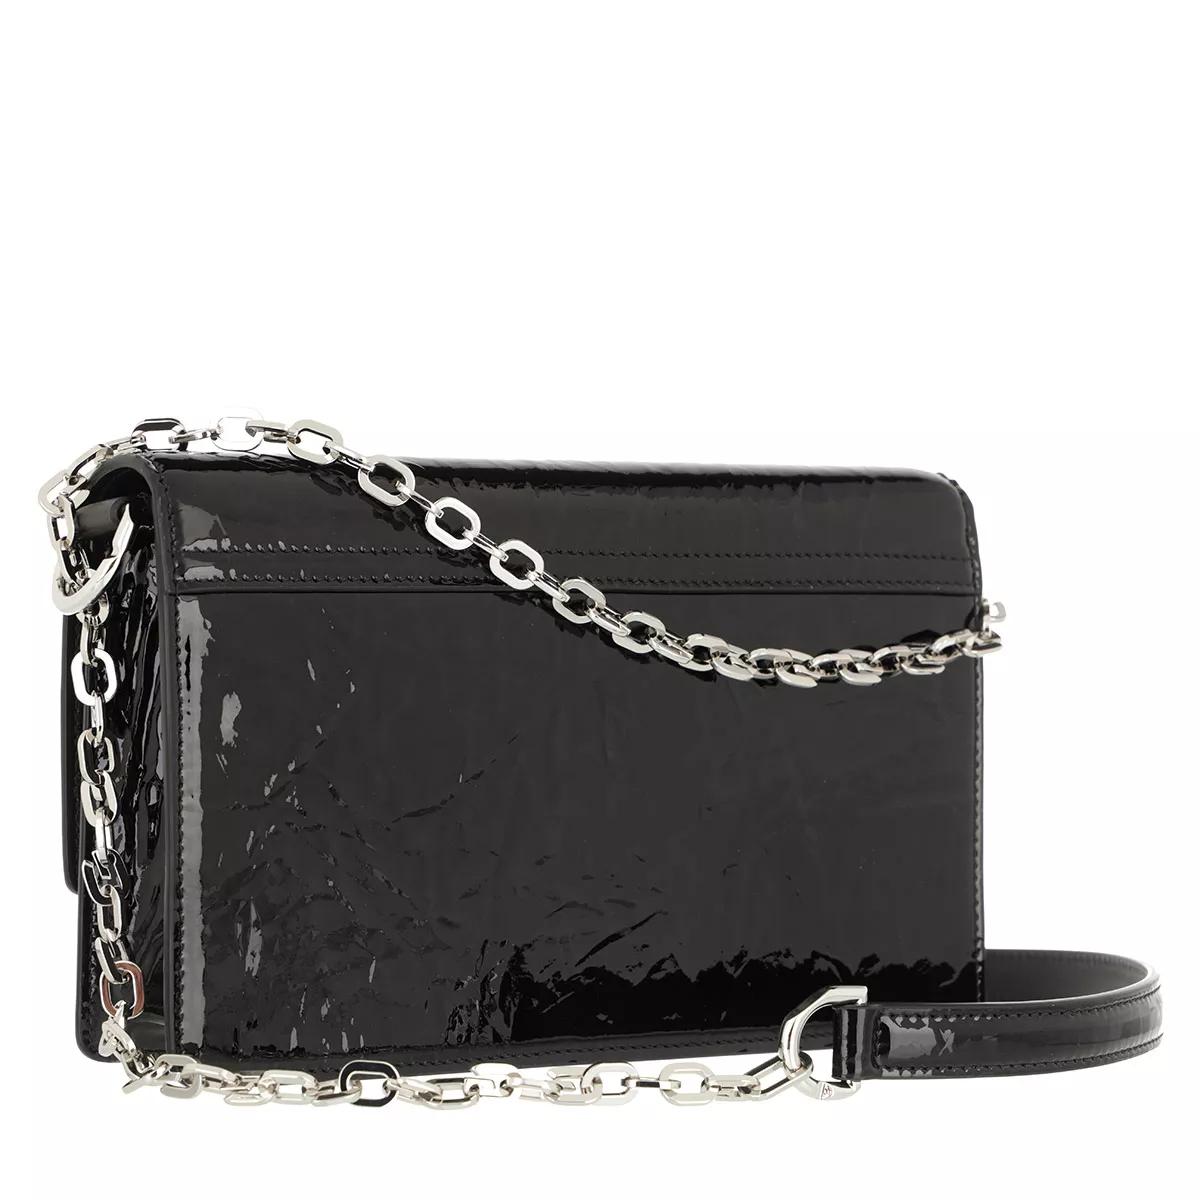 givenchy crossbody bags - small 4g chain bag shinny textured leather - gr. unisize - in - fÃ¼r damen schwarz donna